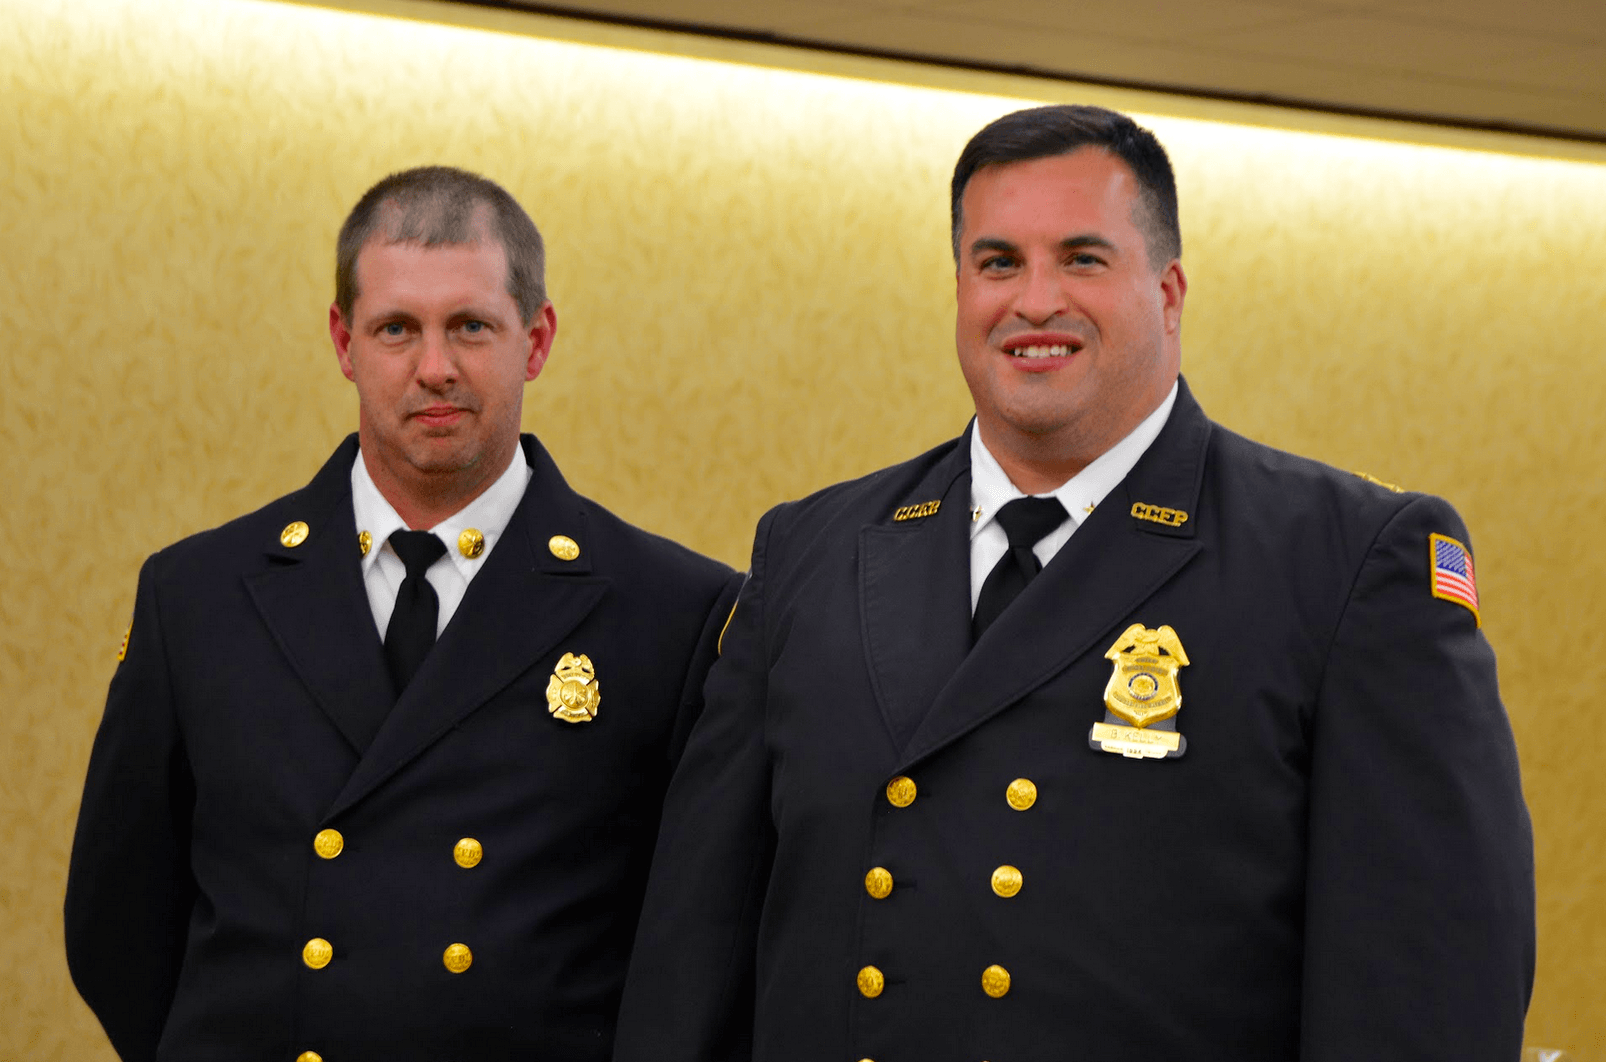 L to R - 1st Asst. Chief Robert Wilson of Round Hill Volunteer Fire Co was presented by Brian M. Kelly, Greenwich Fire Department's Volunteer Coordinator/Chief of the Cos Cob Fire Police Patrol, the Volunteer Coordinators Award